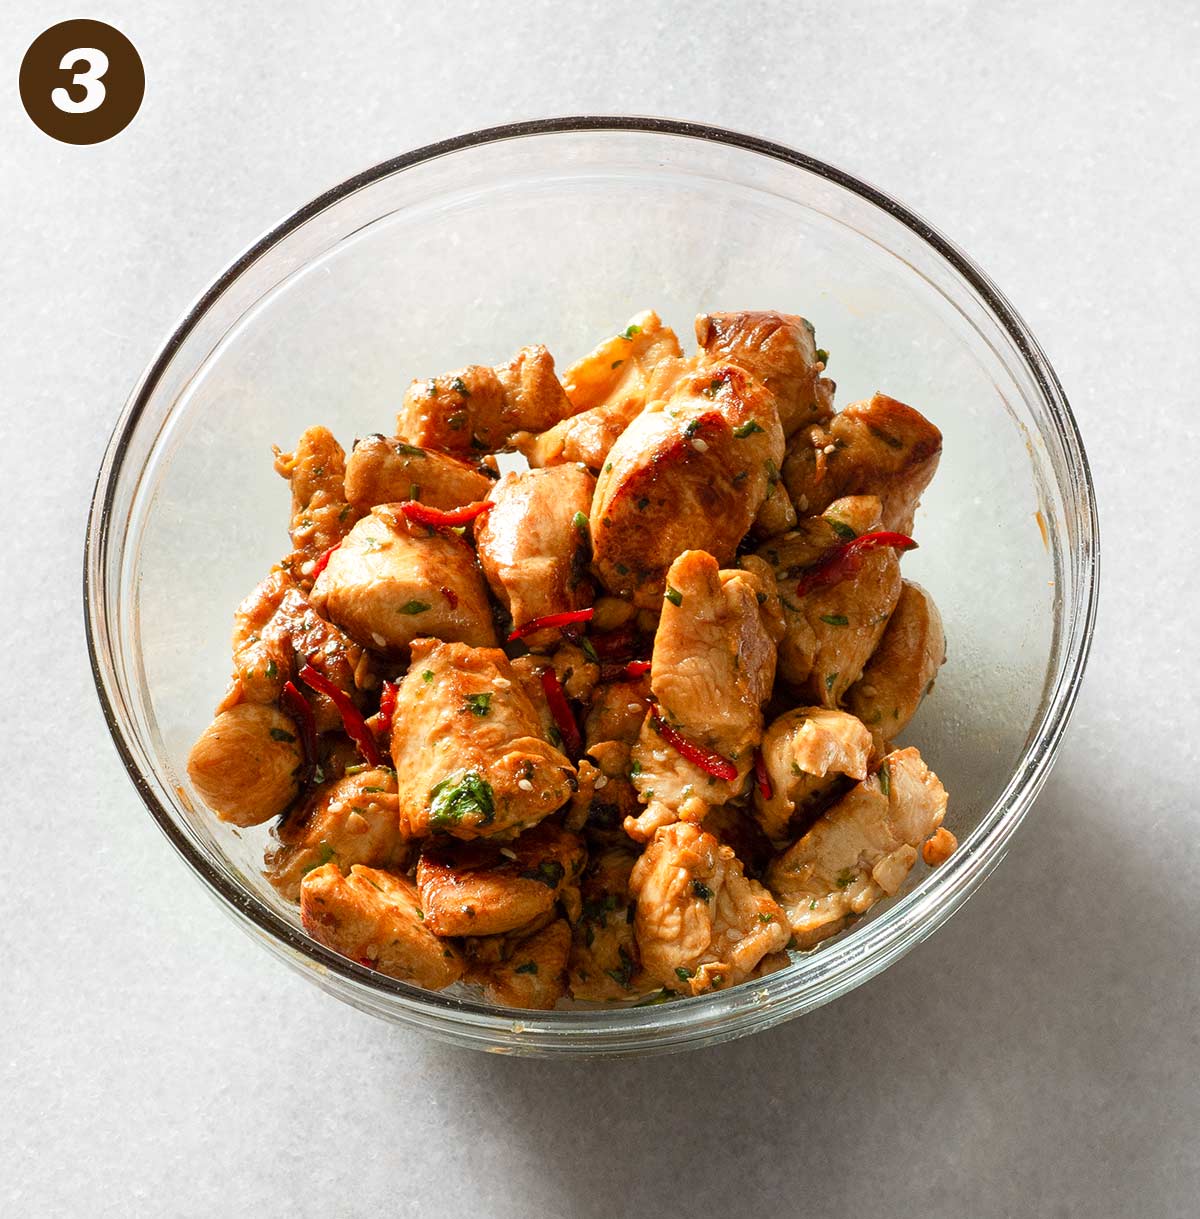 Cooked chicken chunks in a bowl.